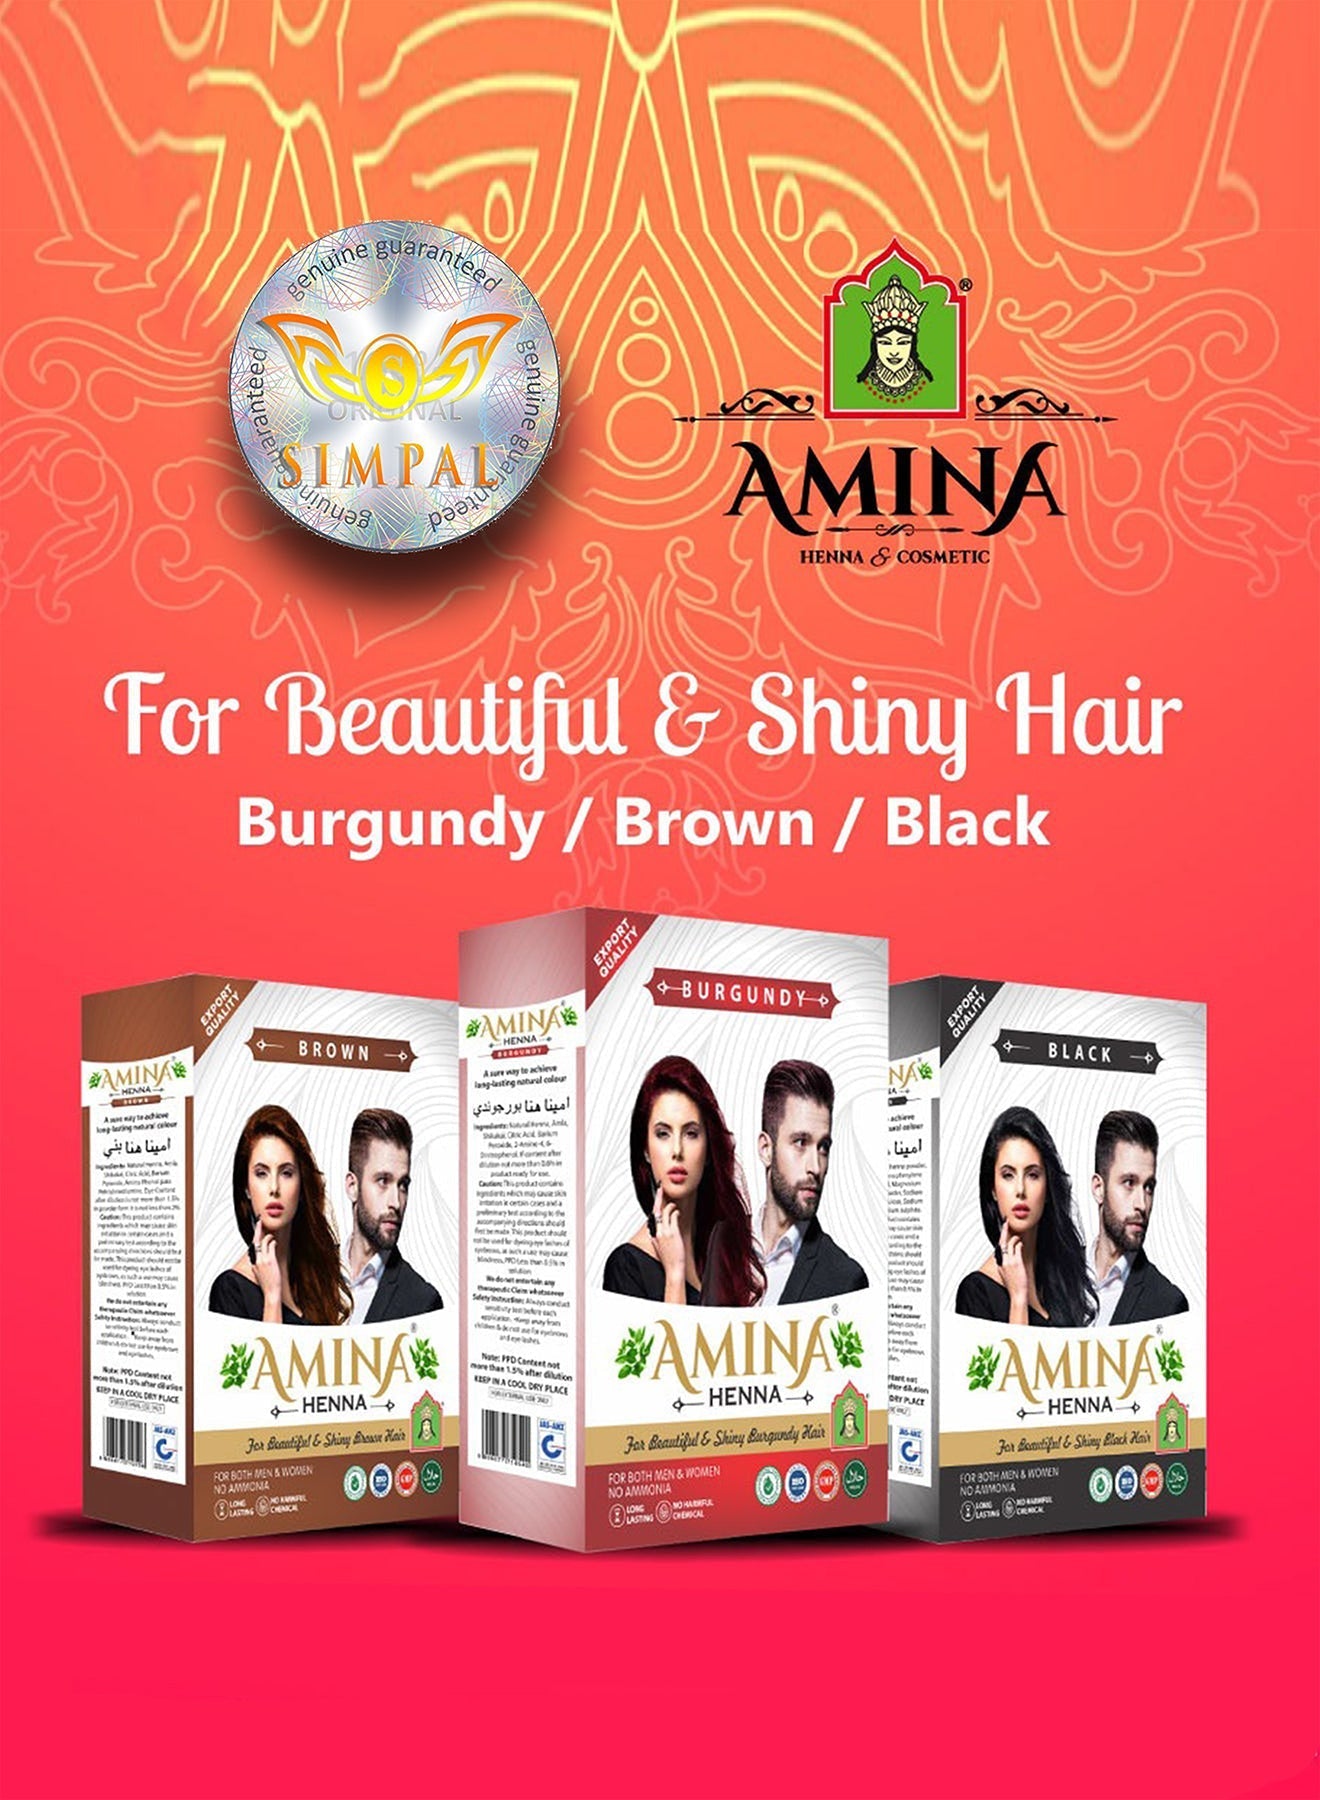 Amina Henna Natural Color Brown 10g x 6 pouch